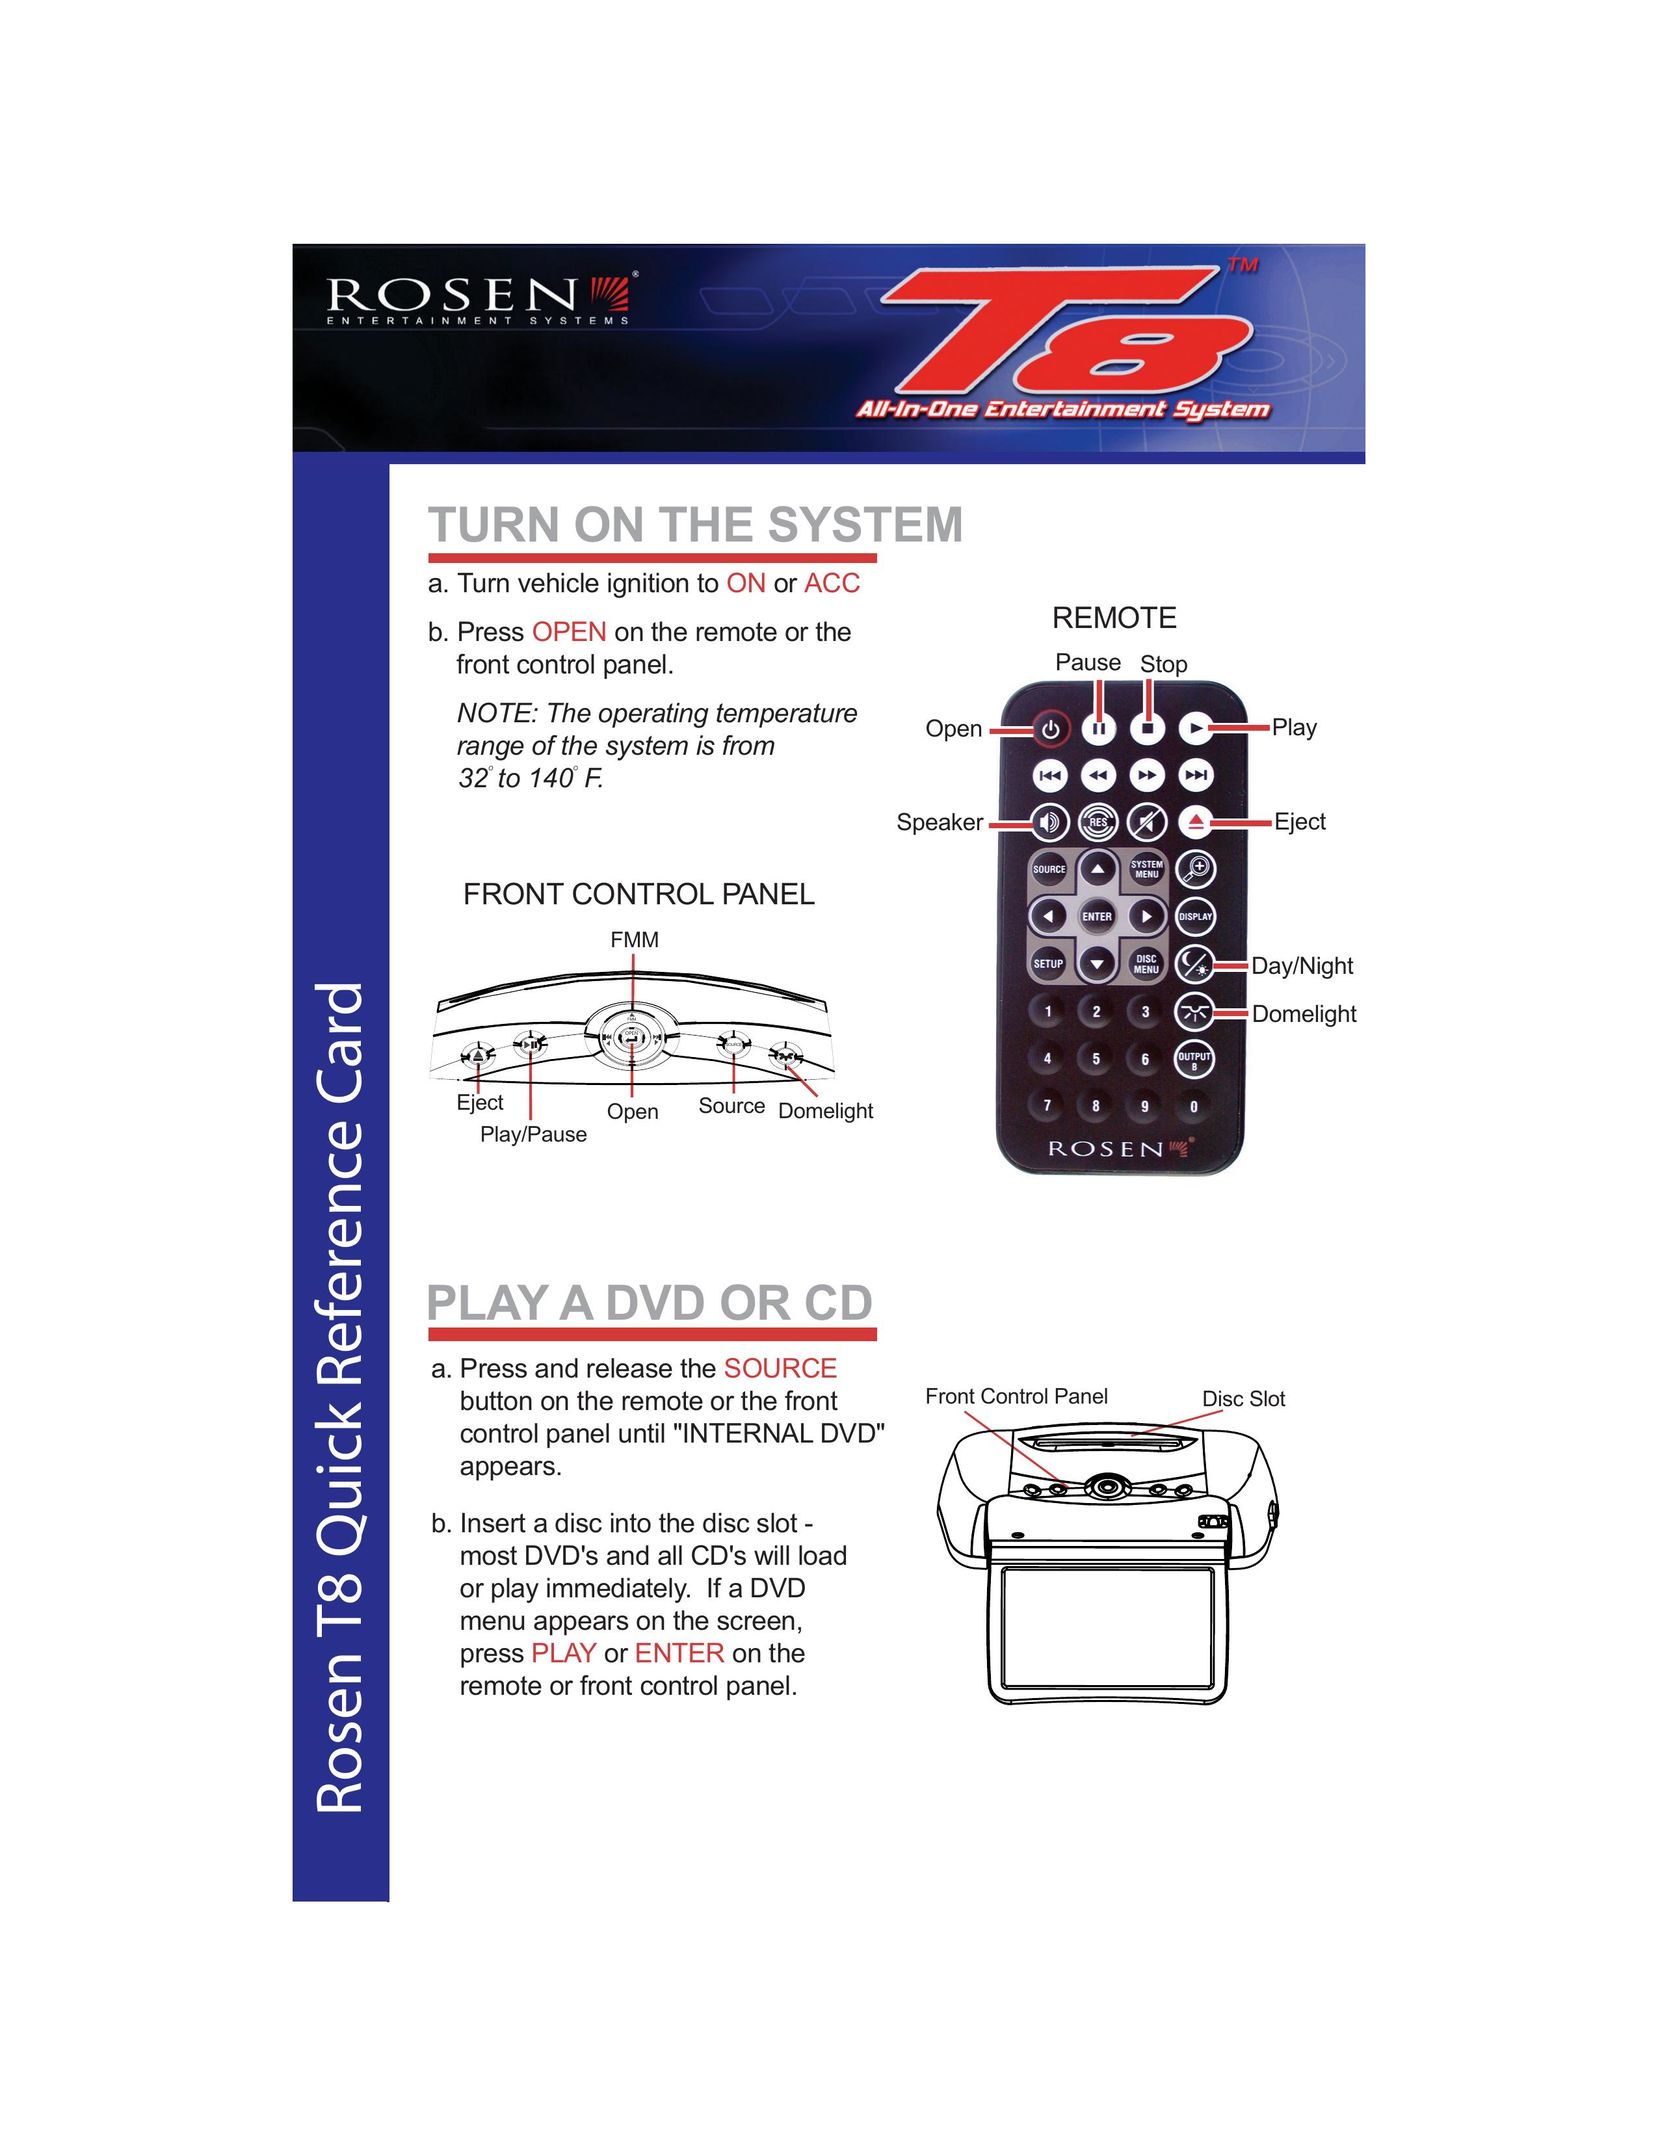 Rosen Entertainment Systems T8 Car Video System User Manual